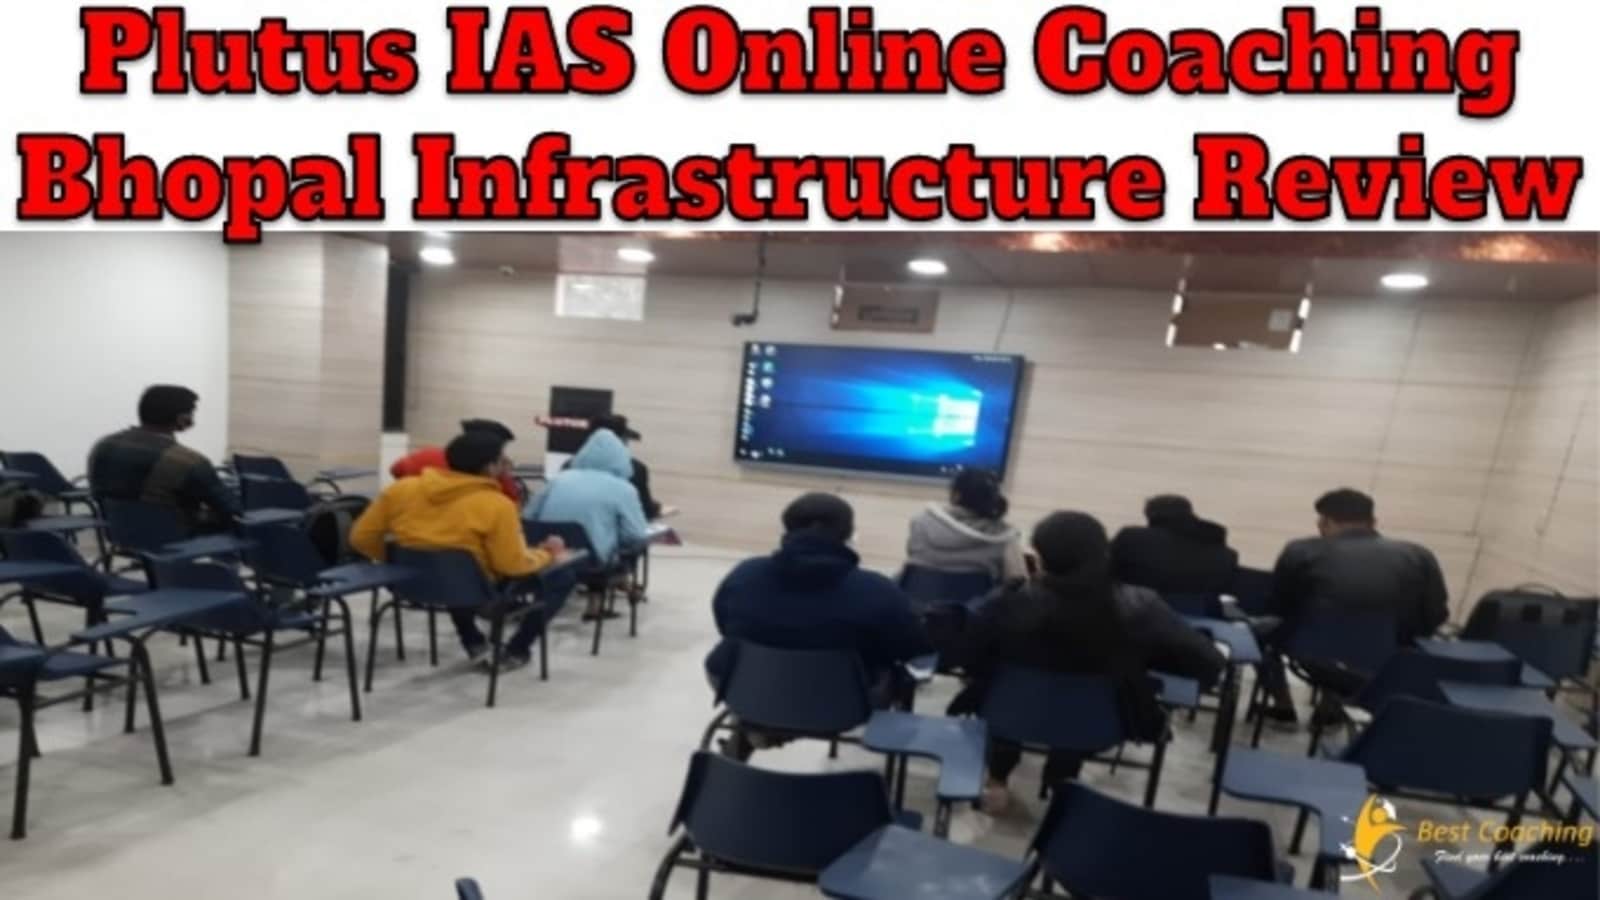 Plutus IAS Online Coaching Bhopal Infrastructure Review